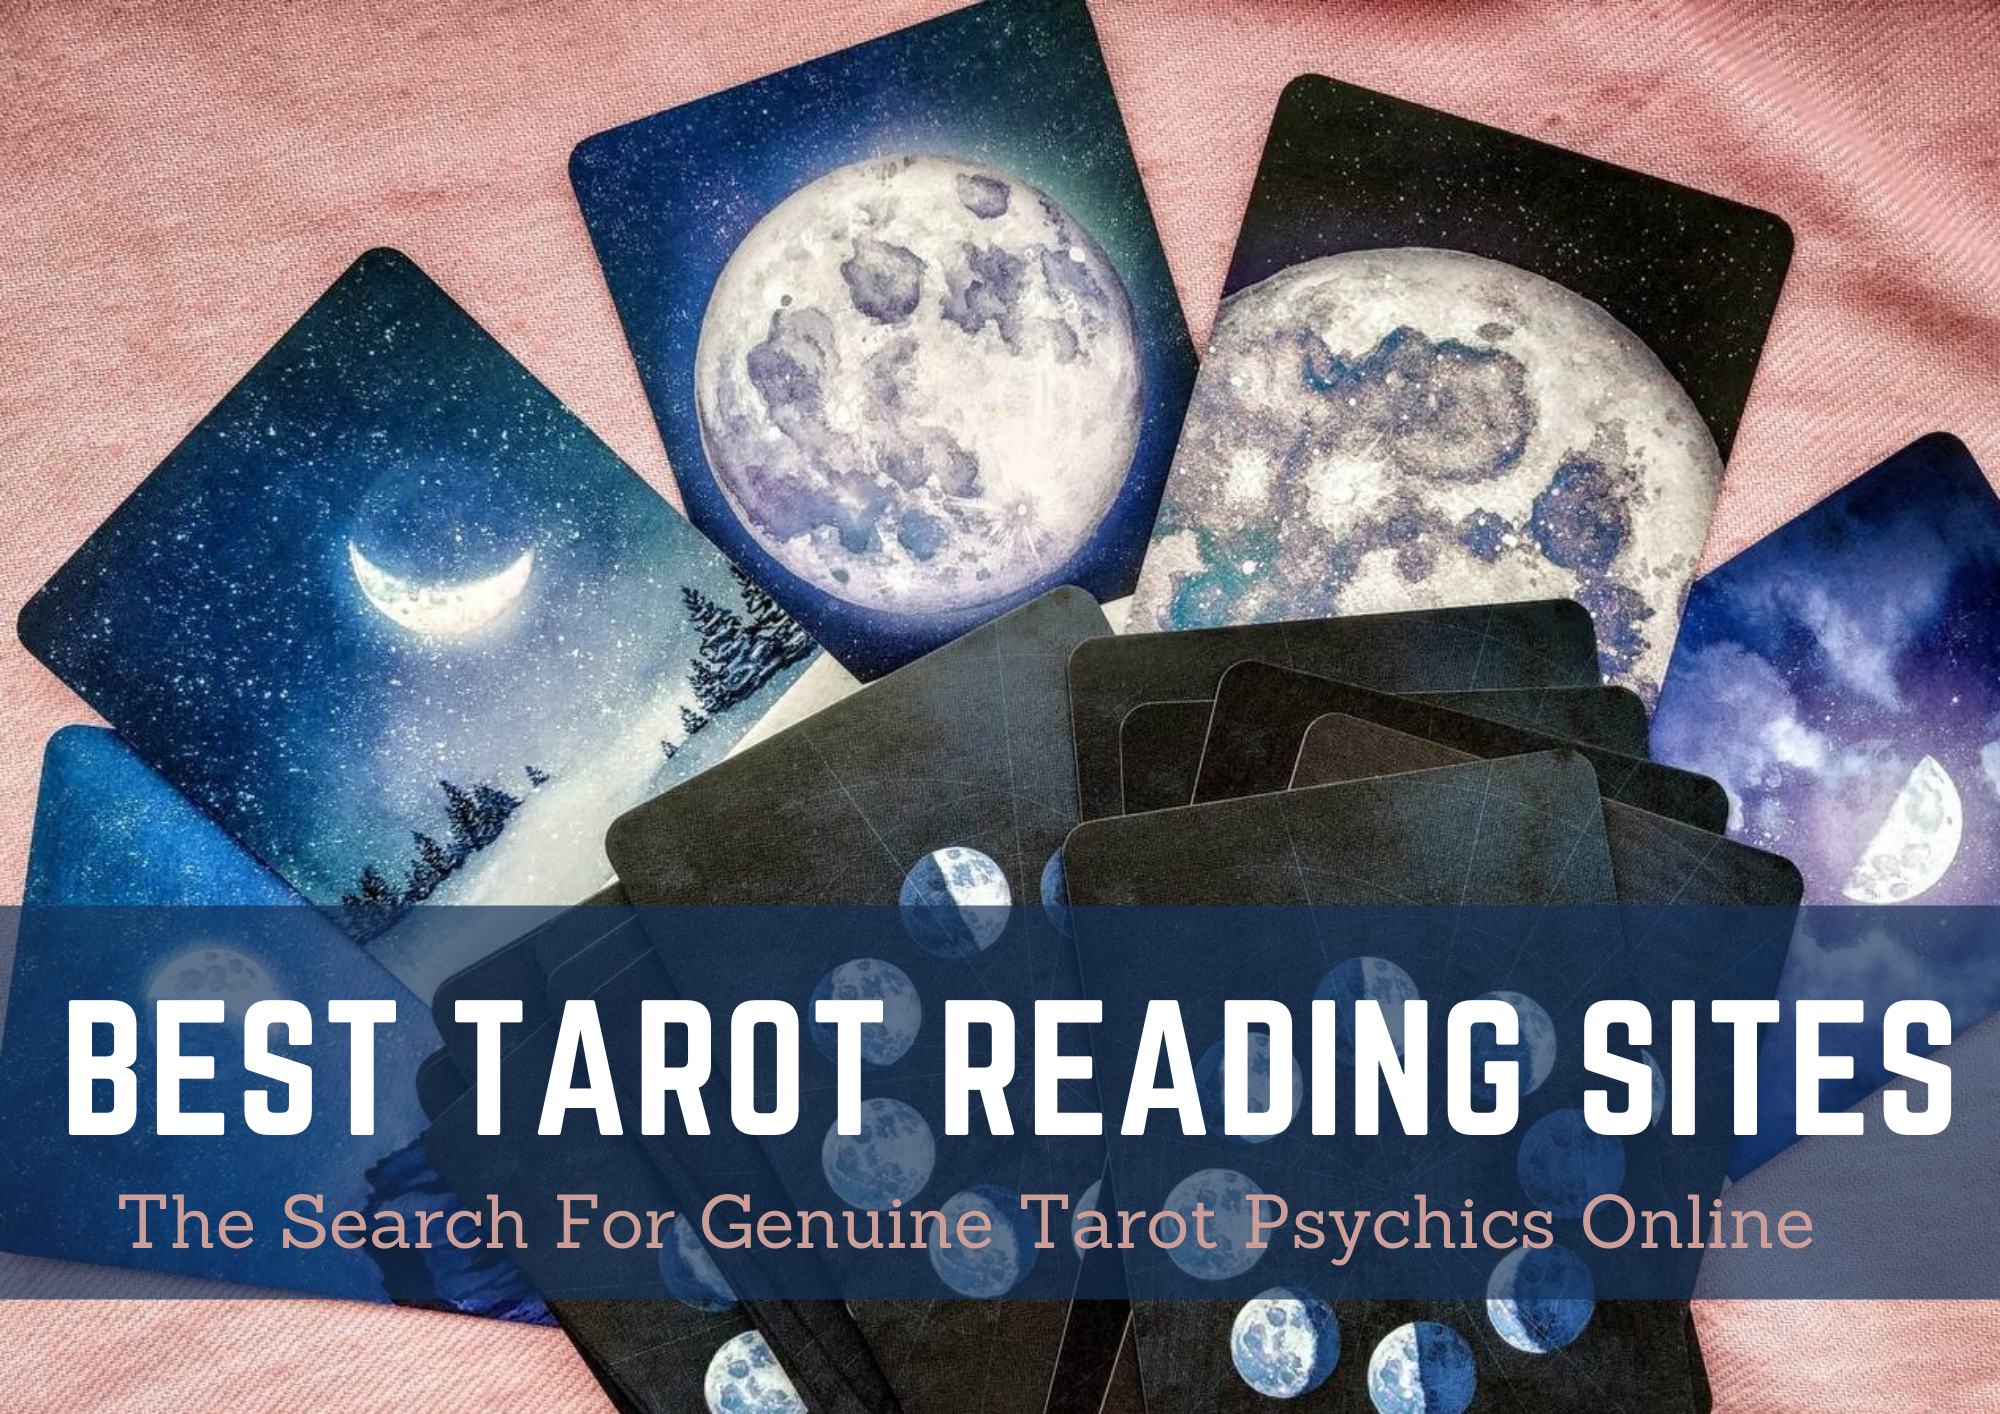 Best Tarot Reading Sites - The Search For Genuine Tarot Psychics Online